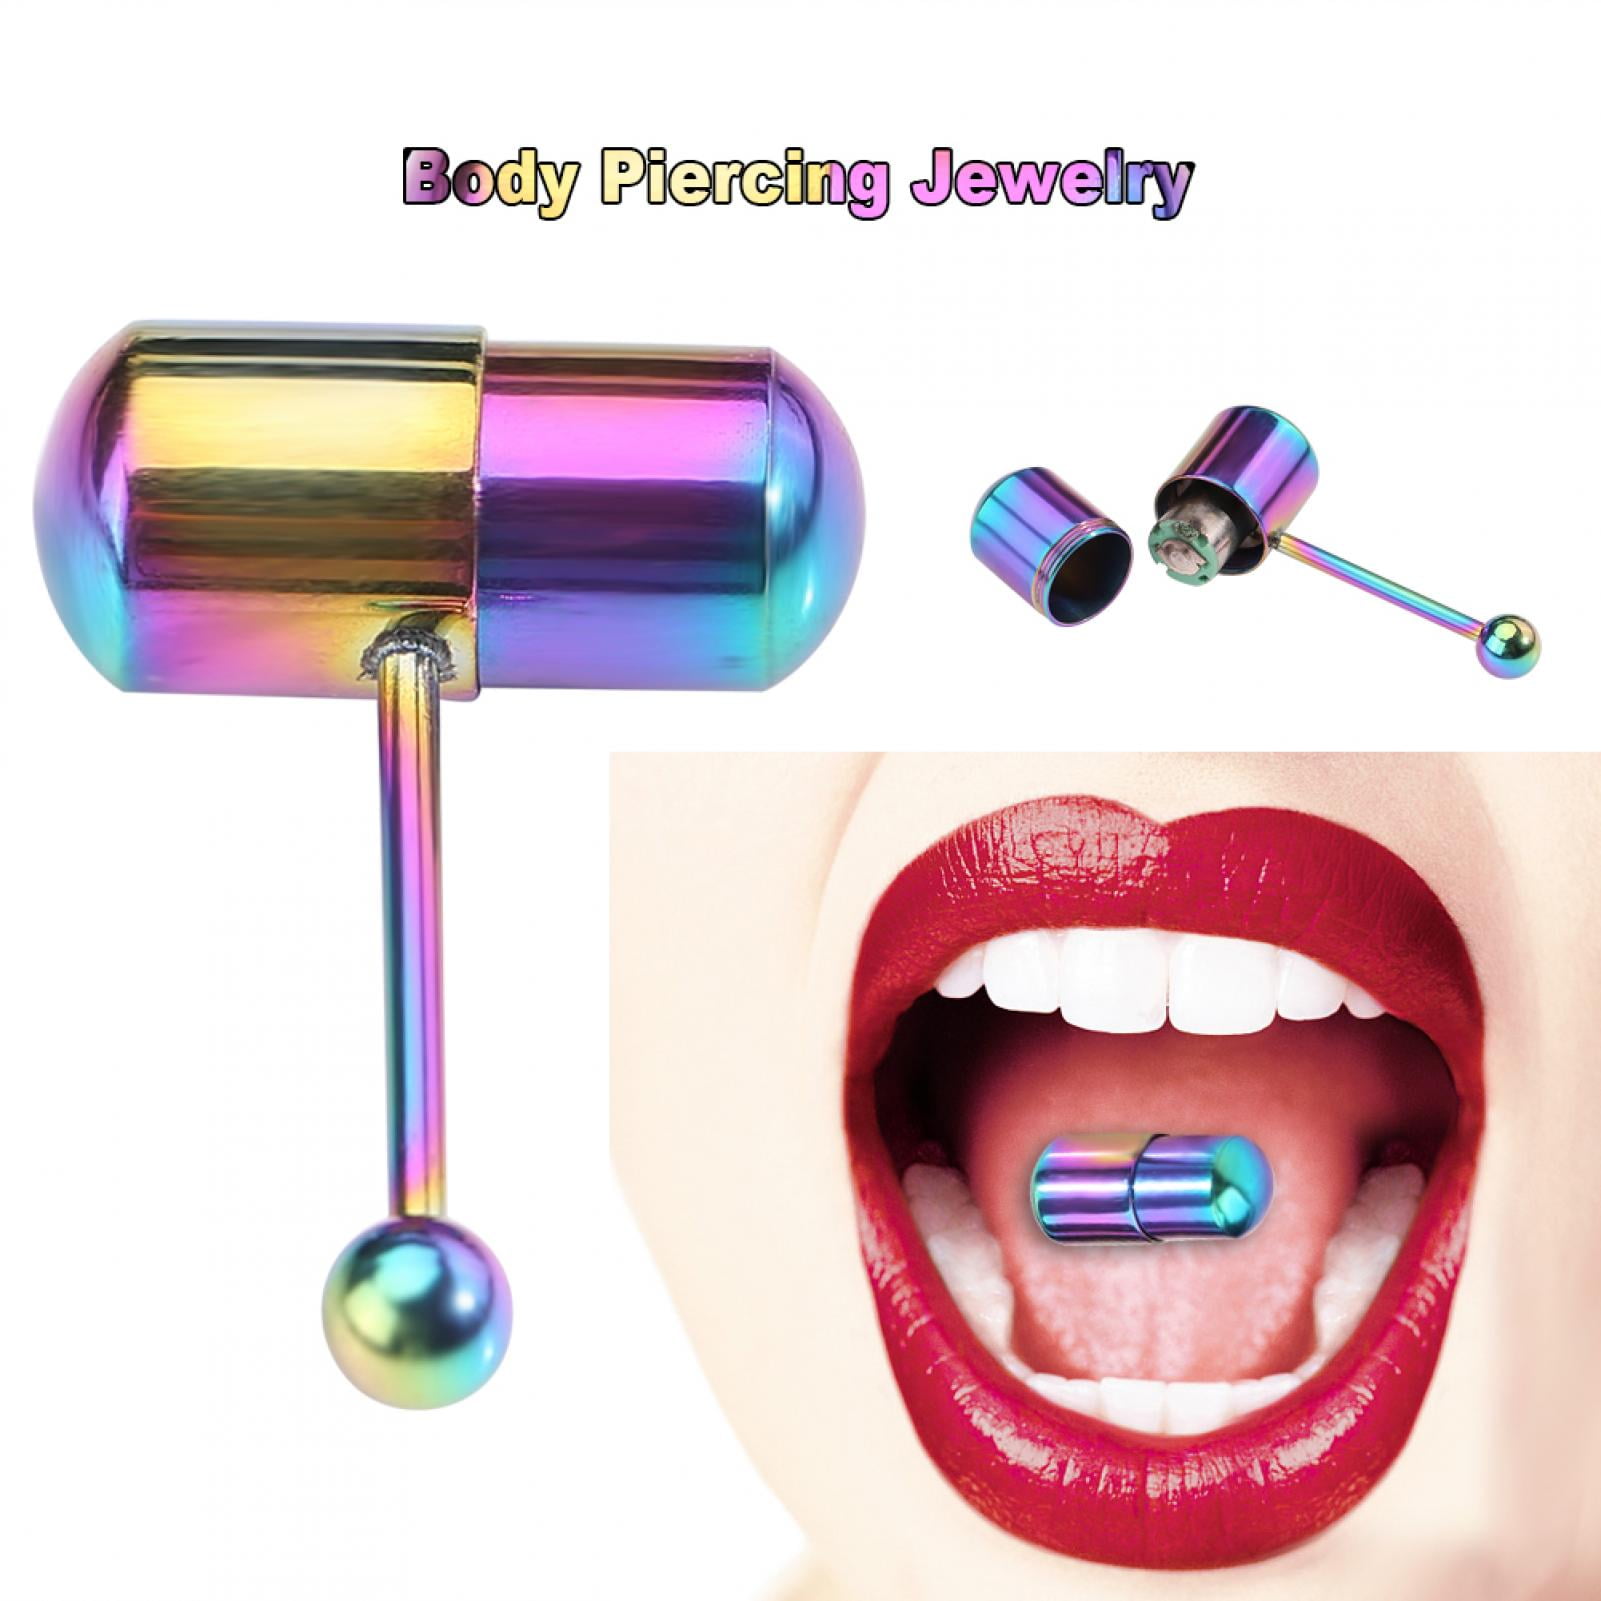 Vibrating Tongue/Belly Button Rings Stainless Steel Stud Body Piercing Jewellery 